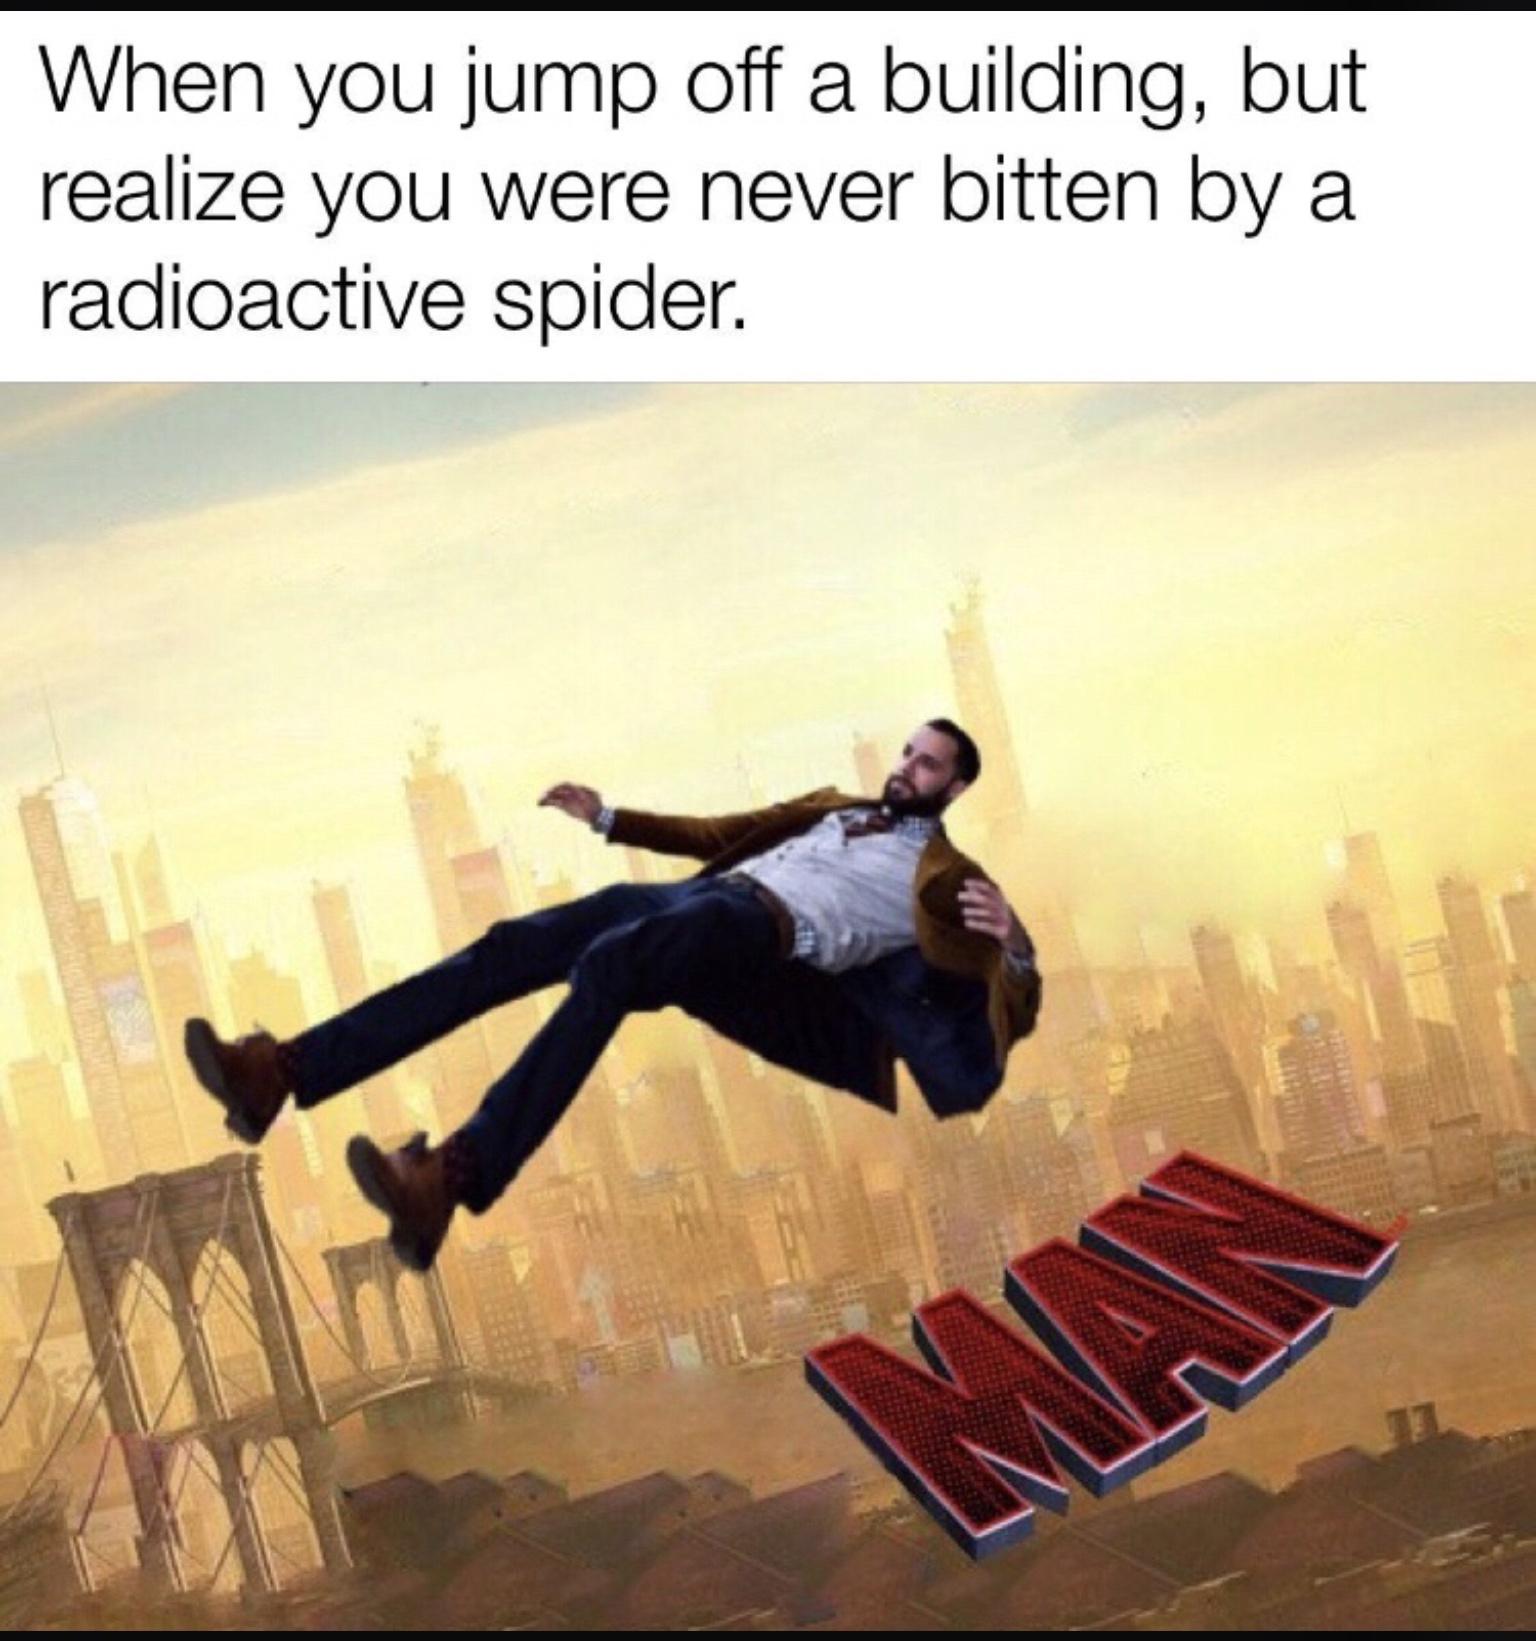 funny memes pics and tweets - willis tower - When you jump off a building, but realize you were never bitten by a radioactive spider. Man